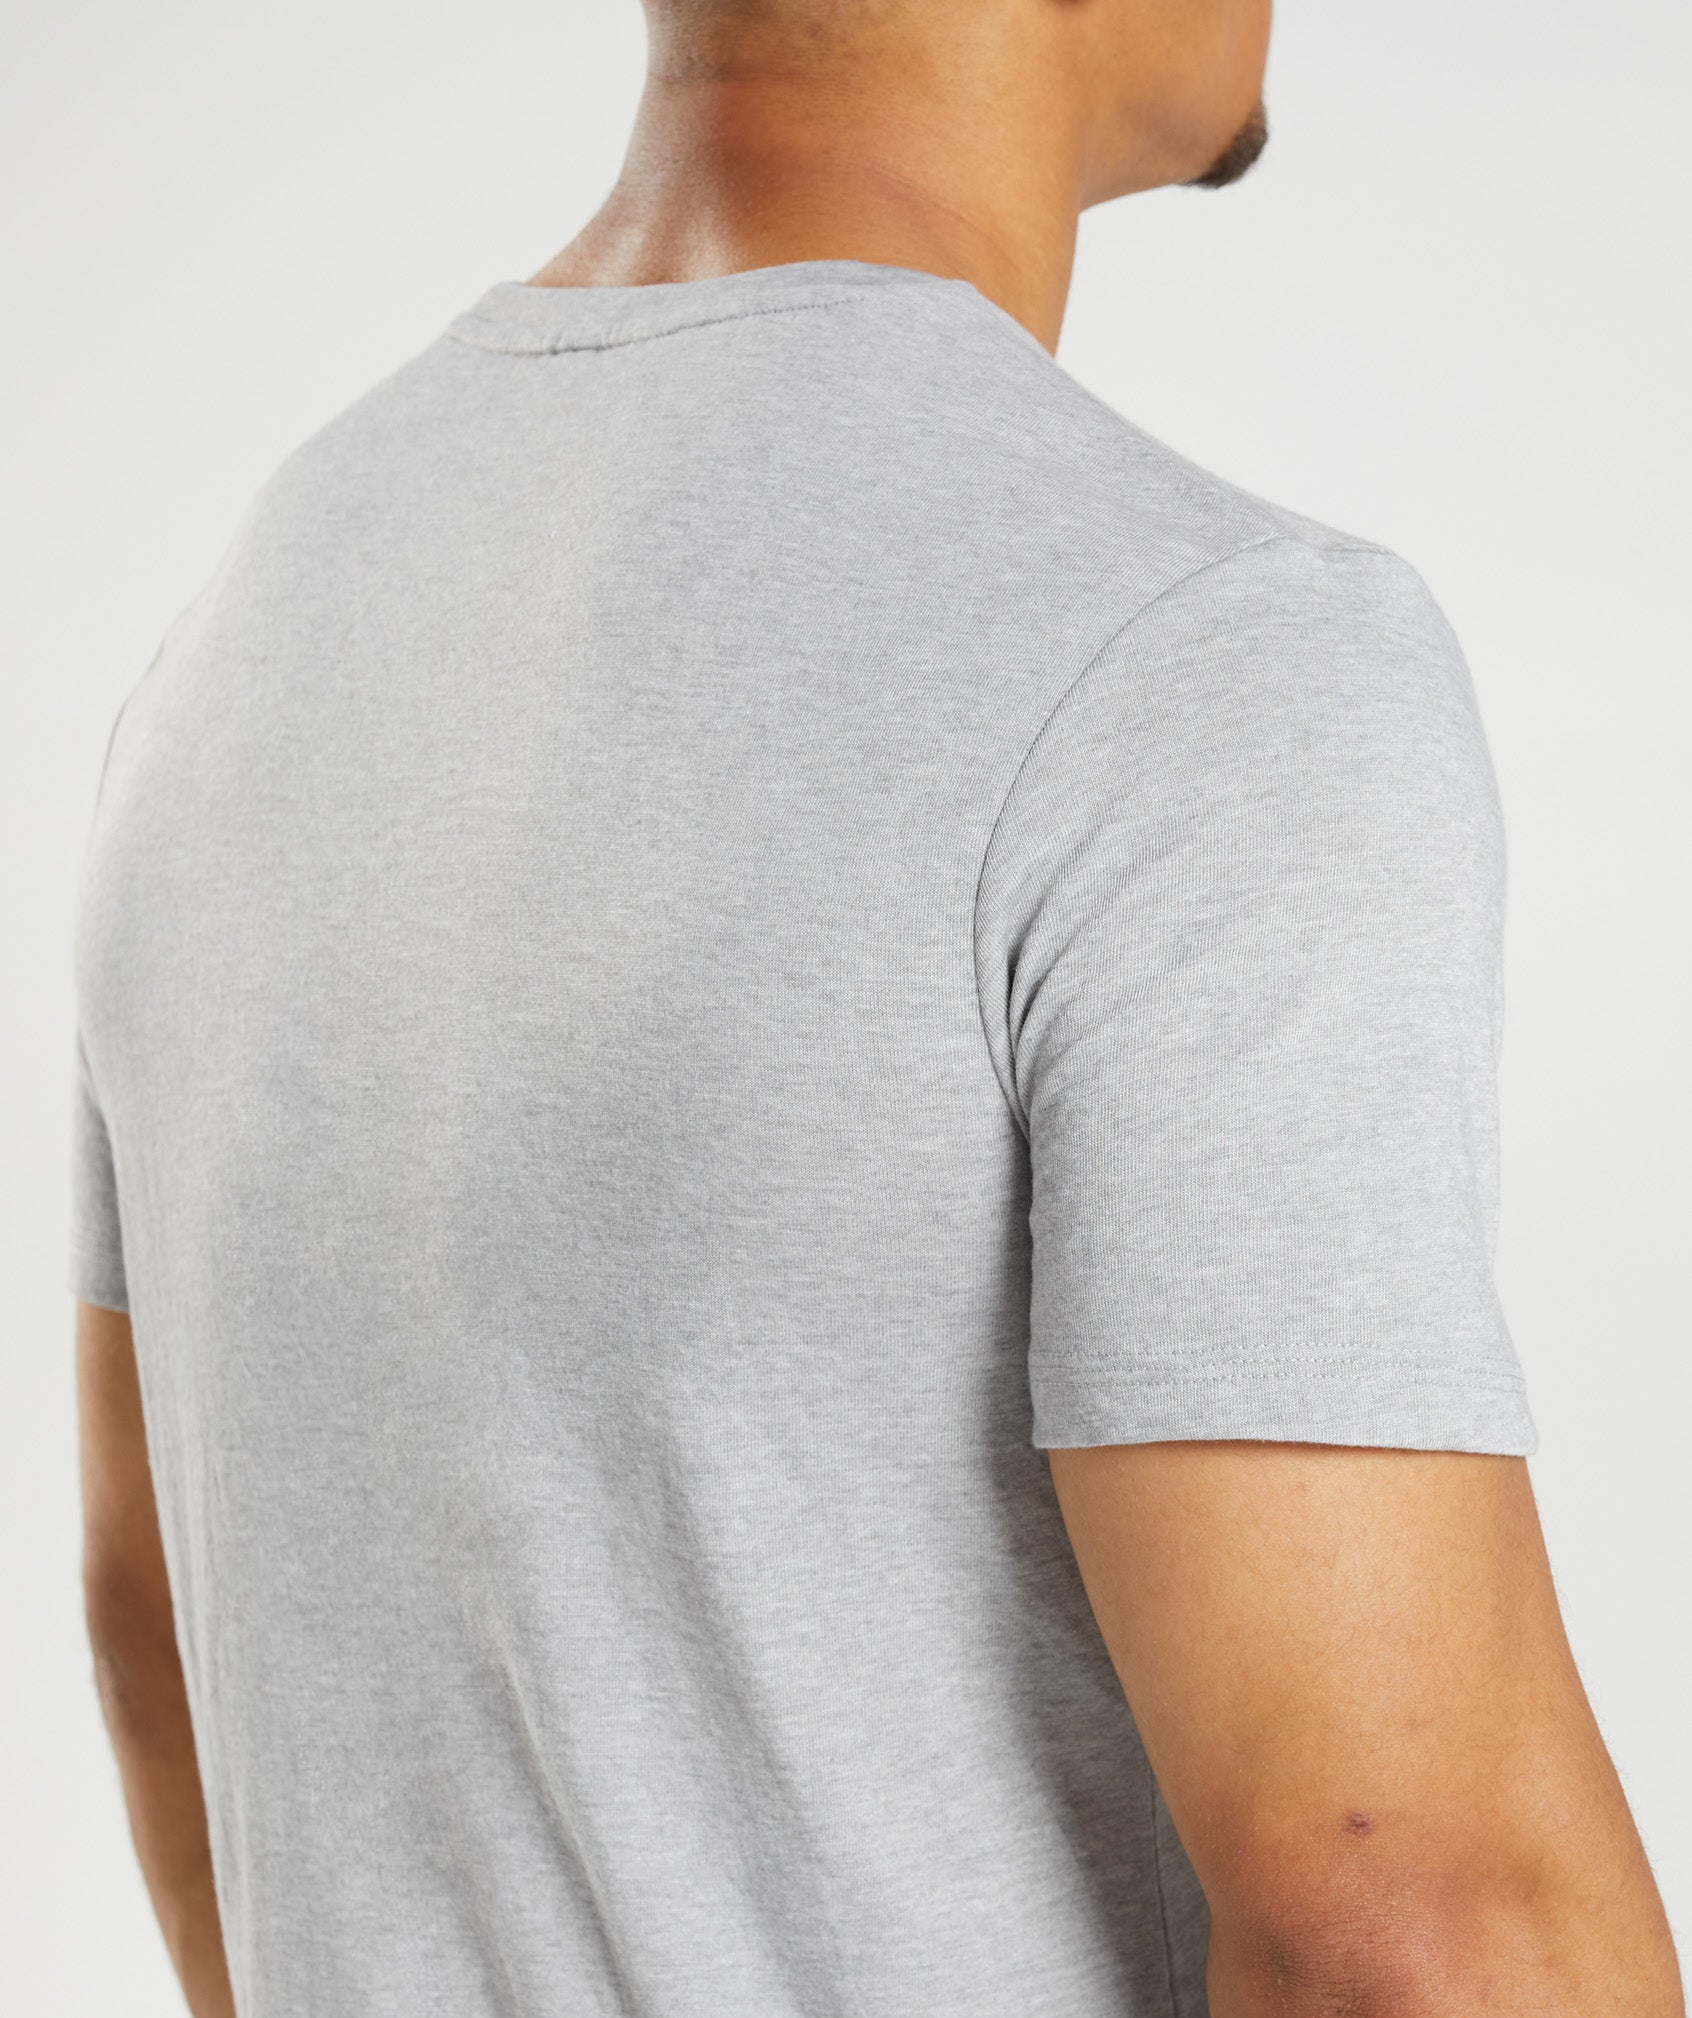 Legacy T-Shirt in Light Grey Core Marl - view 5